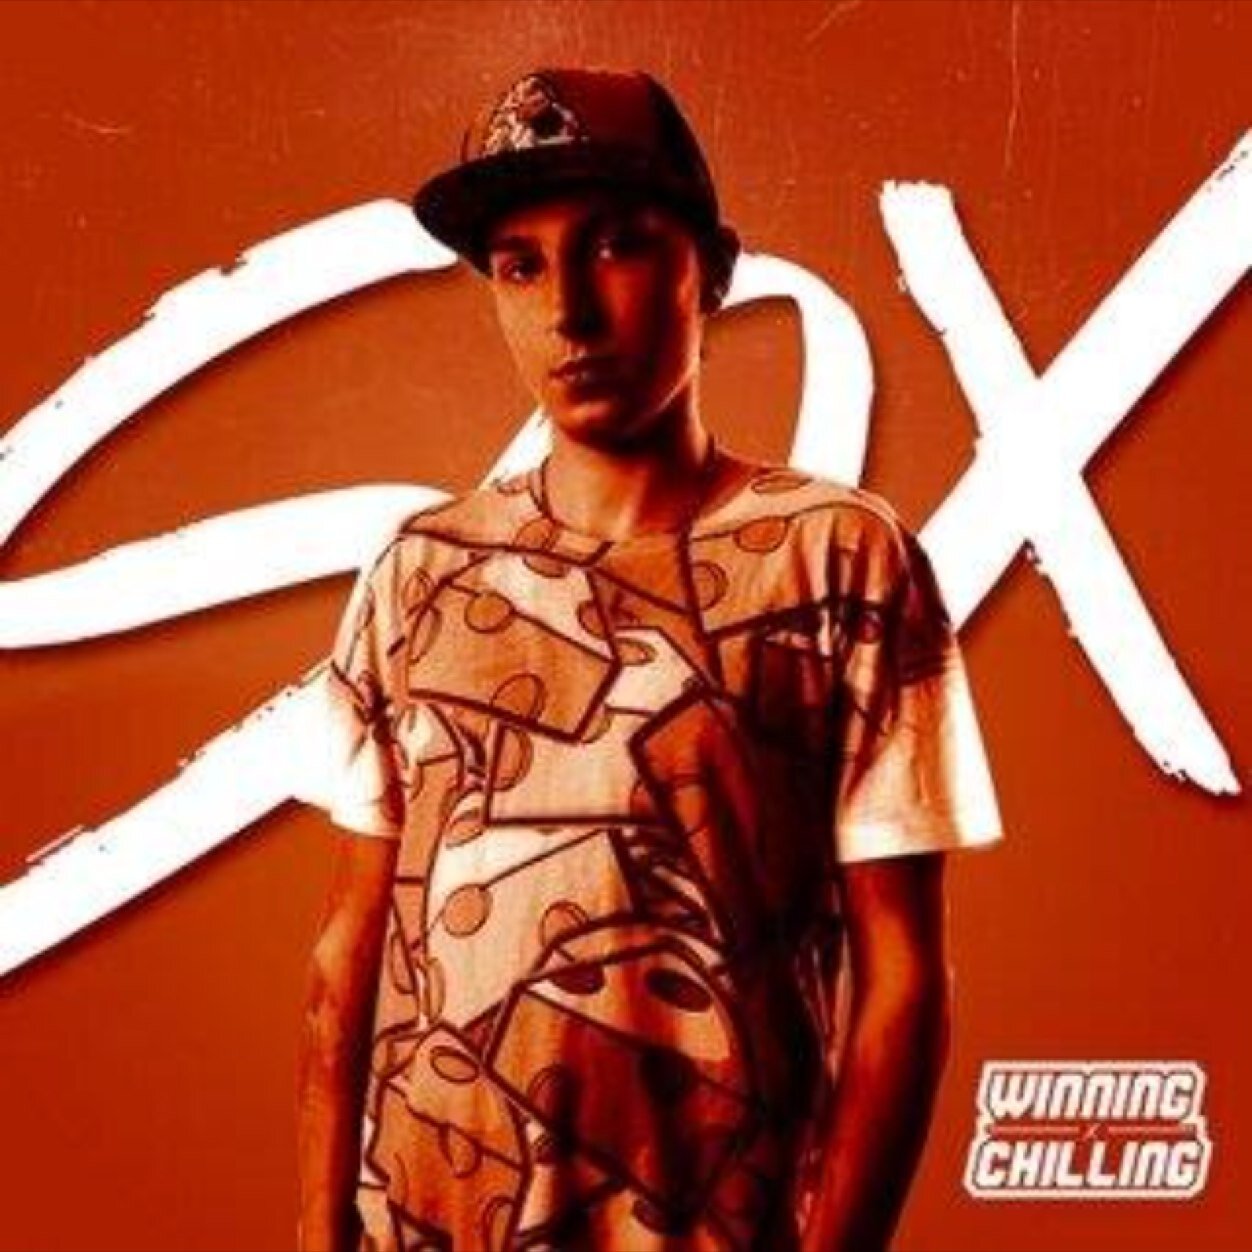 Sox -'Winning & Chilling' Cover aCover Artwork